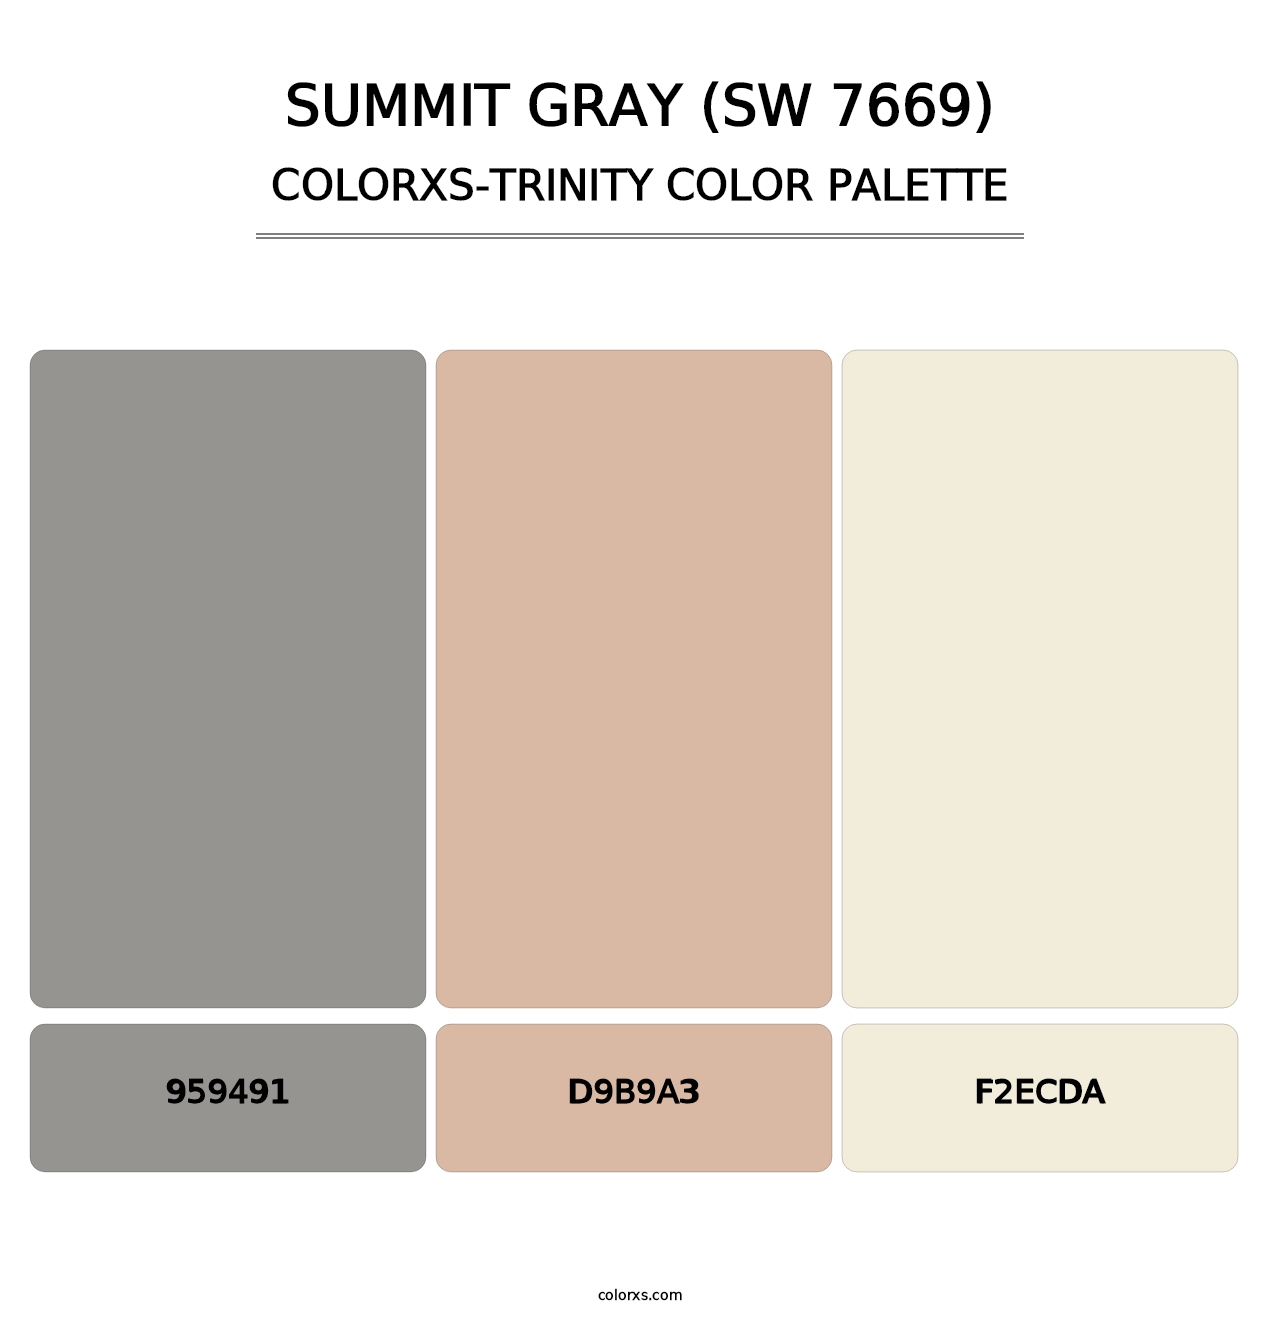 Summit Gray (SW 7669) - Colorxs Trinity Palette